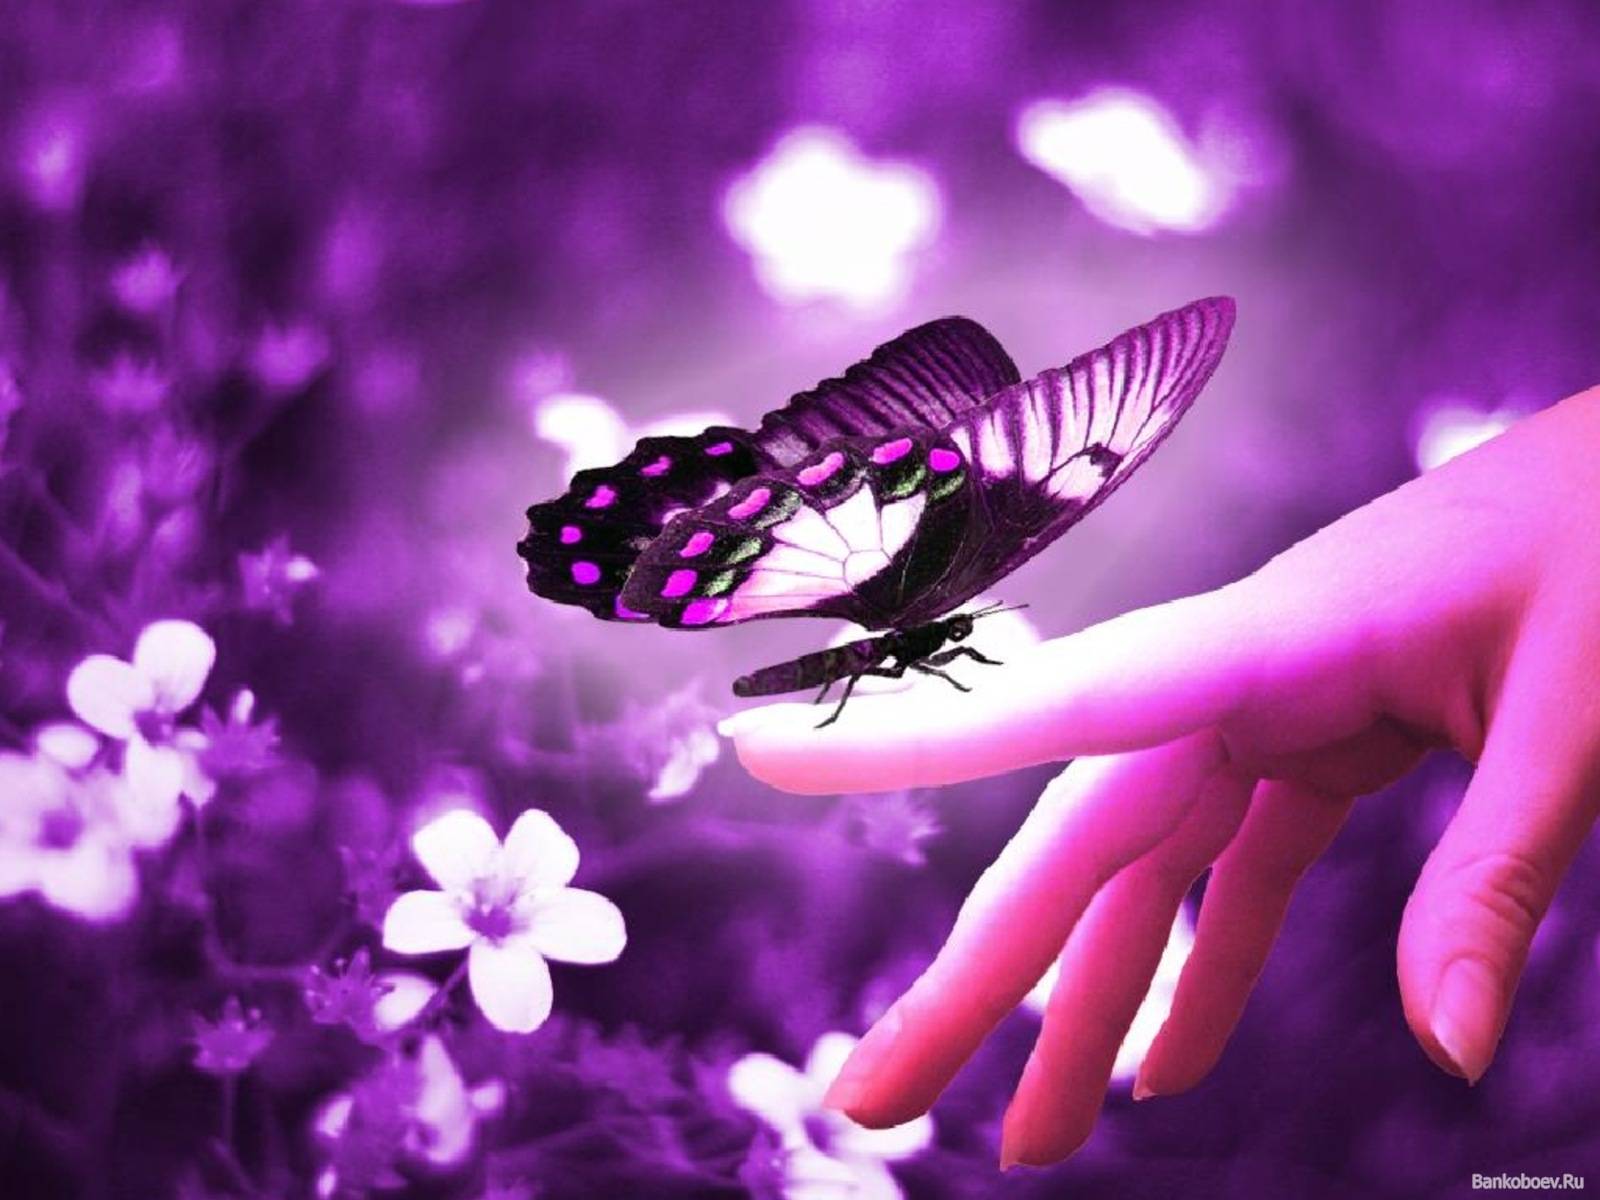 358663 pink and purple purple and little pink butterfly with purple